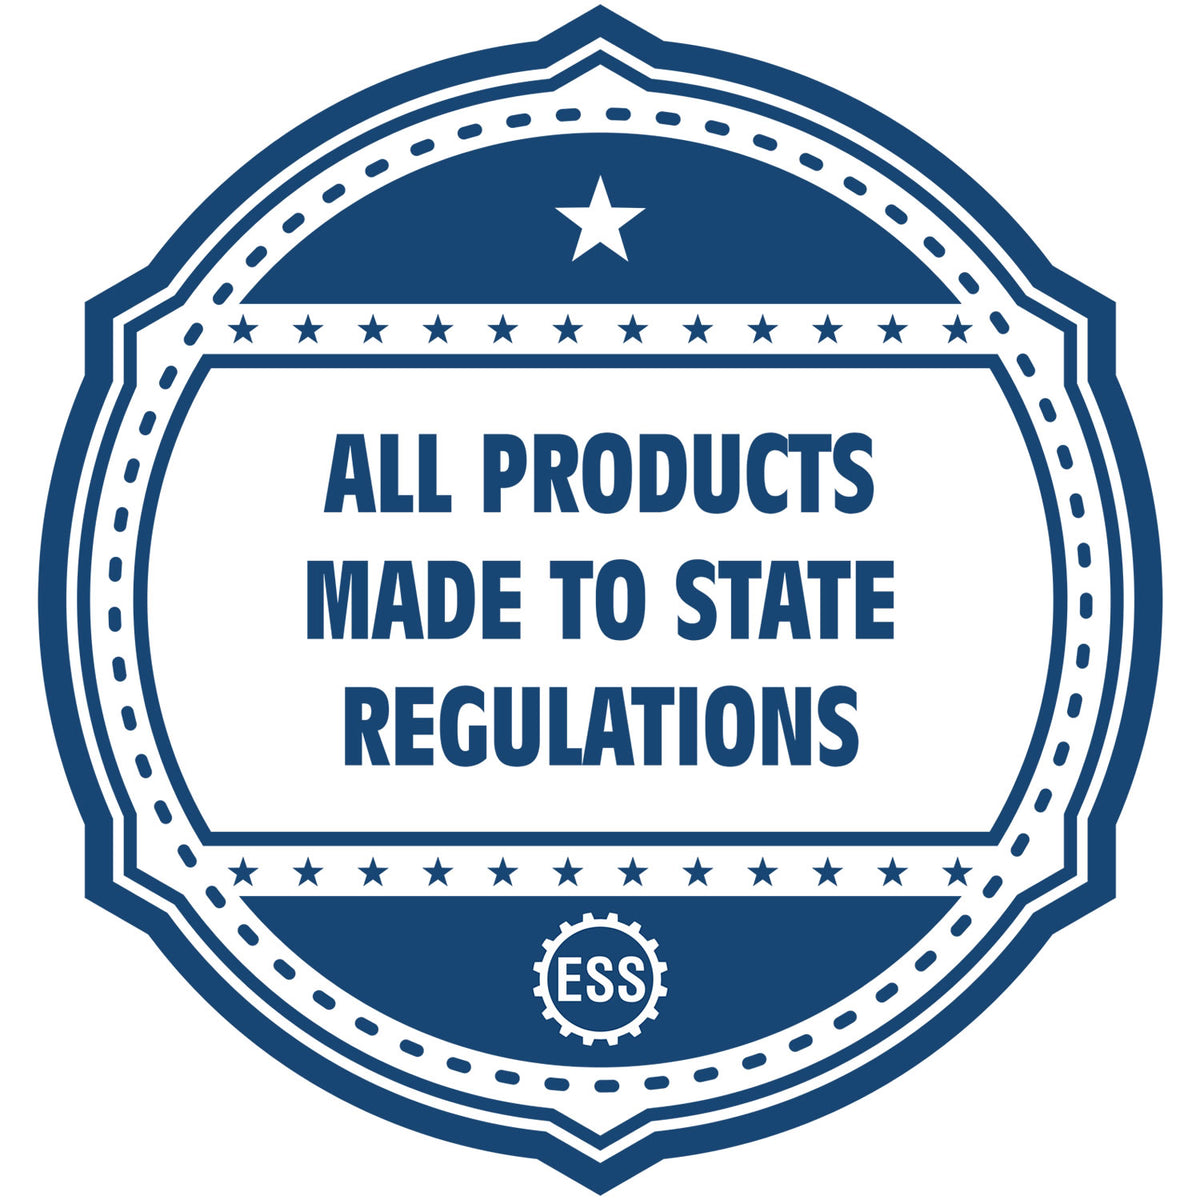 An icon or badge element for the Super Slim Kentucky Notary Public Stamp showing that this product is made in compliance with state regulations.